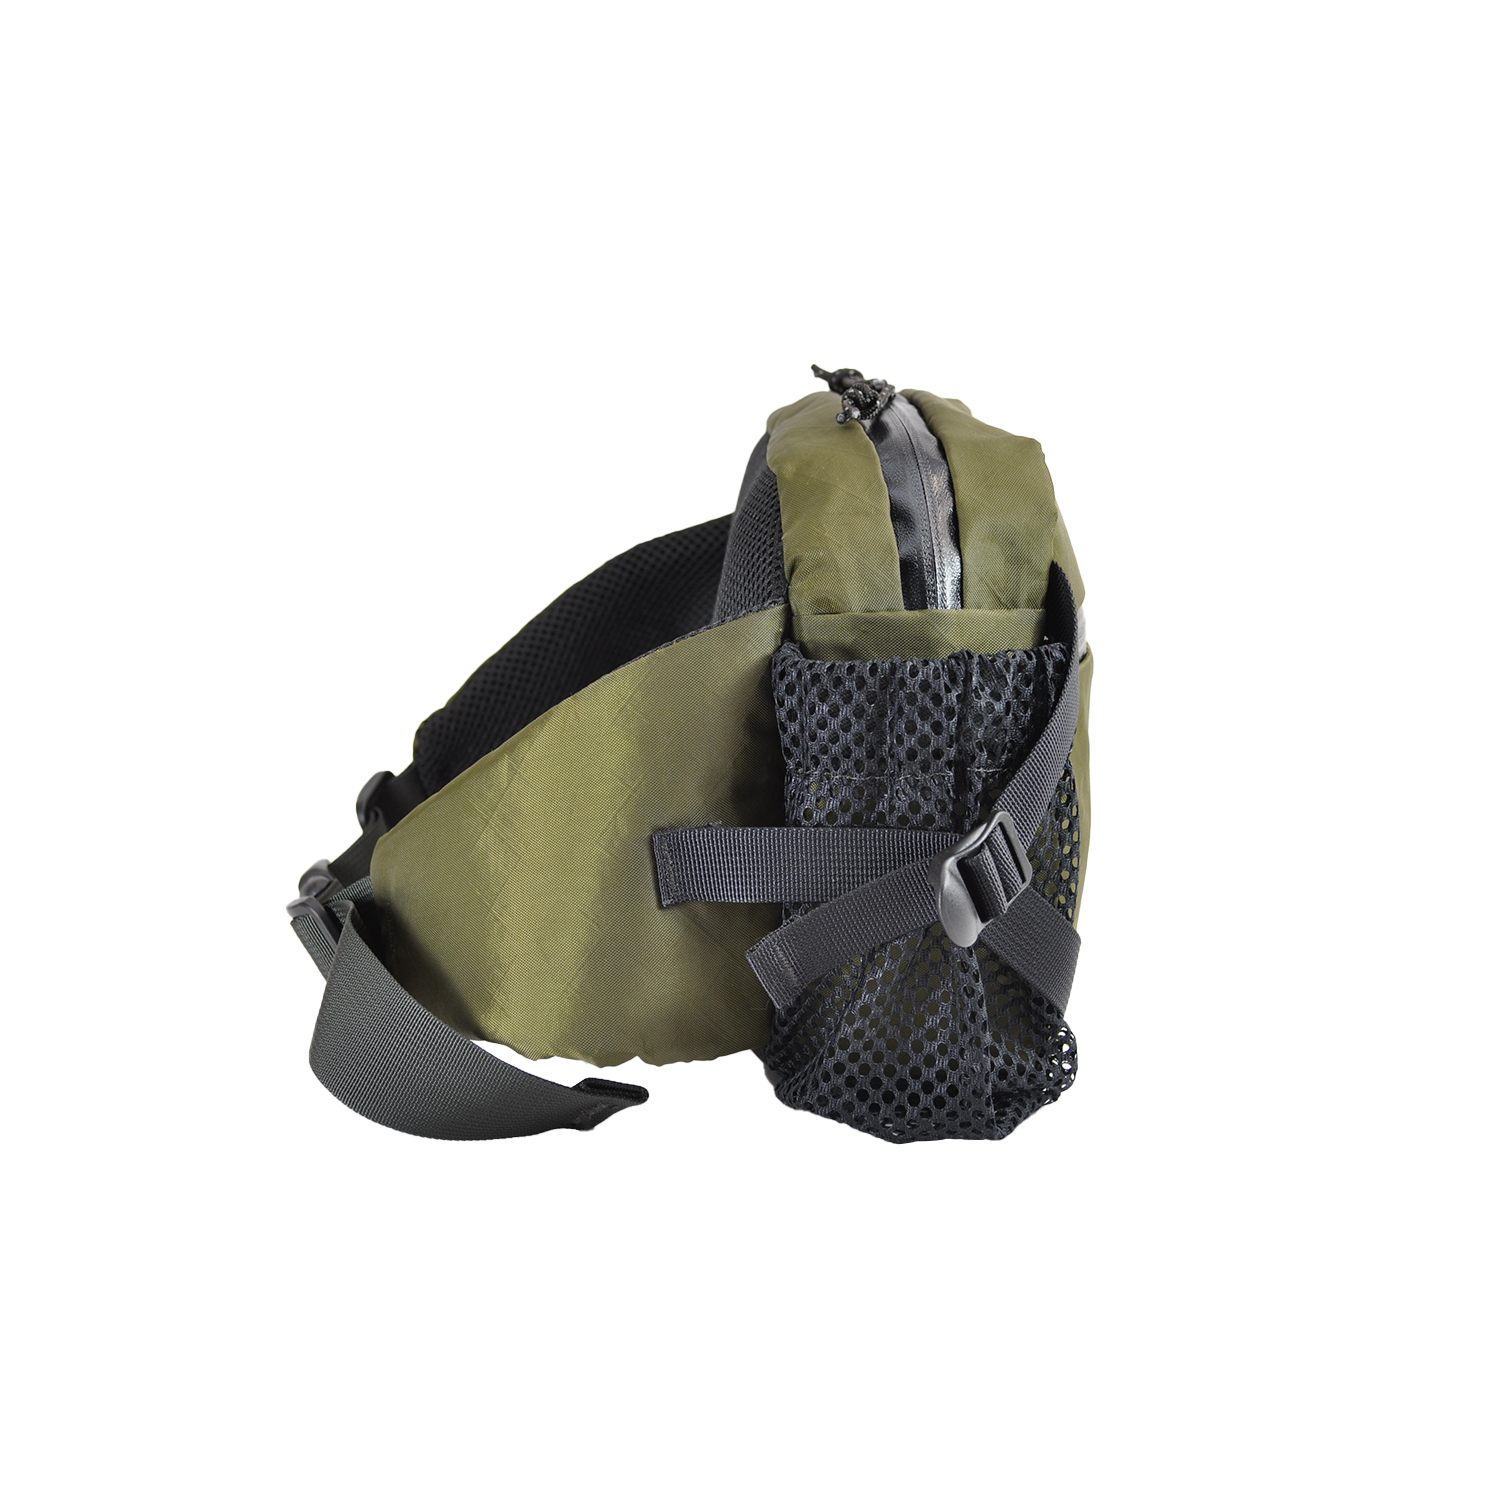 Allspeed x Flowfold Hip Pack - Recycled Olive, Side View